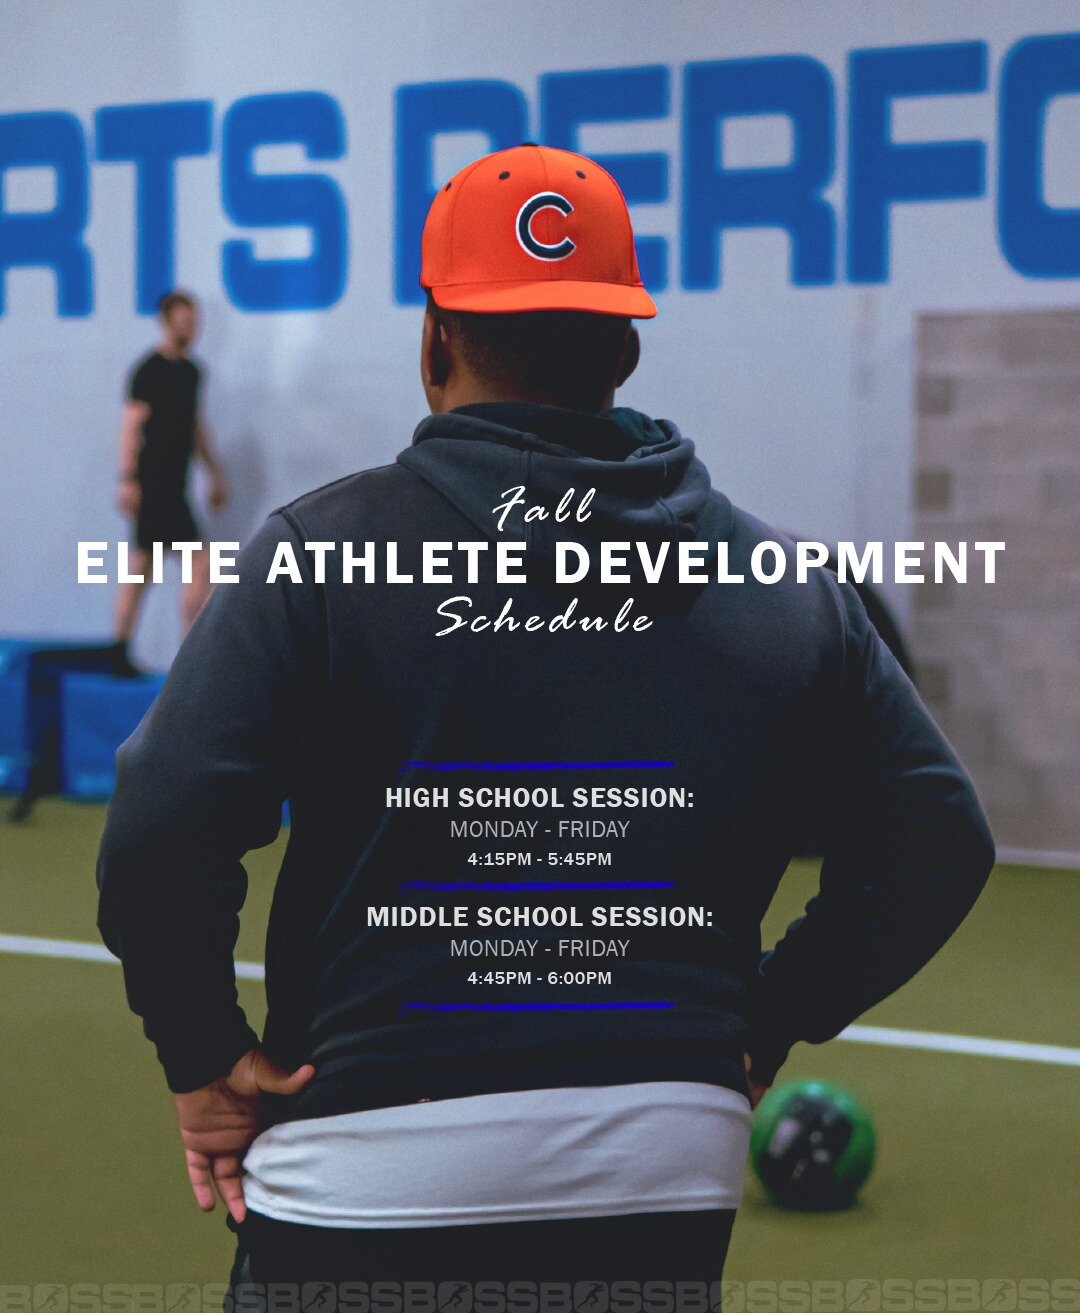 Starting September 6th, the Elite Athletic Development (EAD) will be changing from summer hours to fall hours!

The High School Session will run from 4:15pm - 5:45pm.

The Middle School Session will run from 4:45pm - 6:00pm.

Be sure to mark your cal